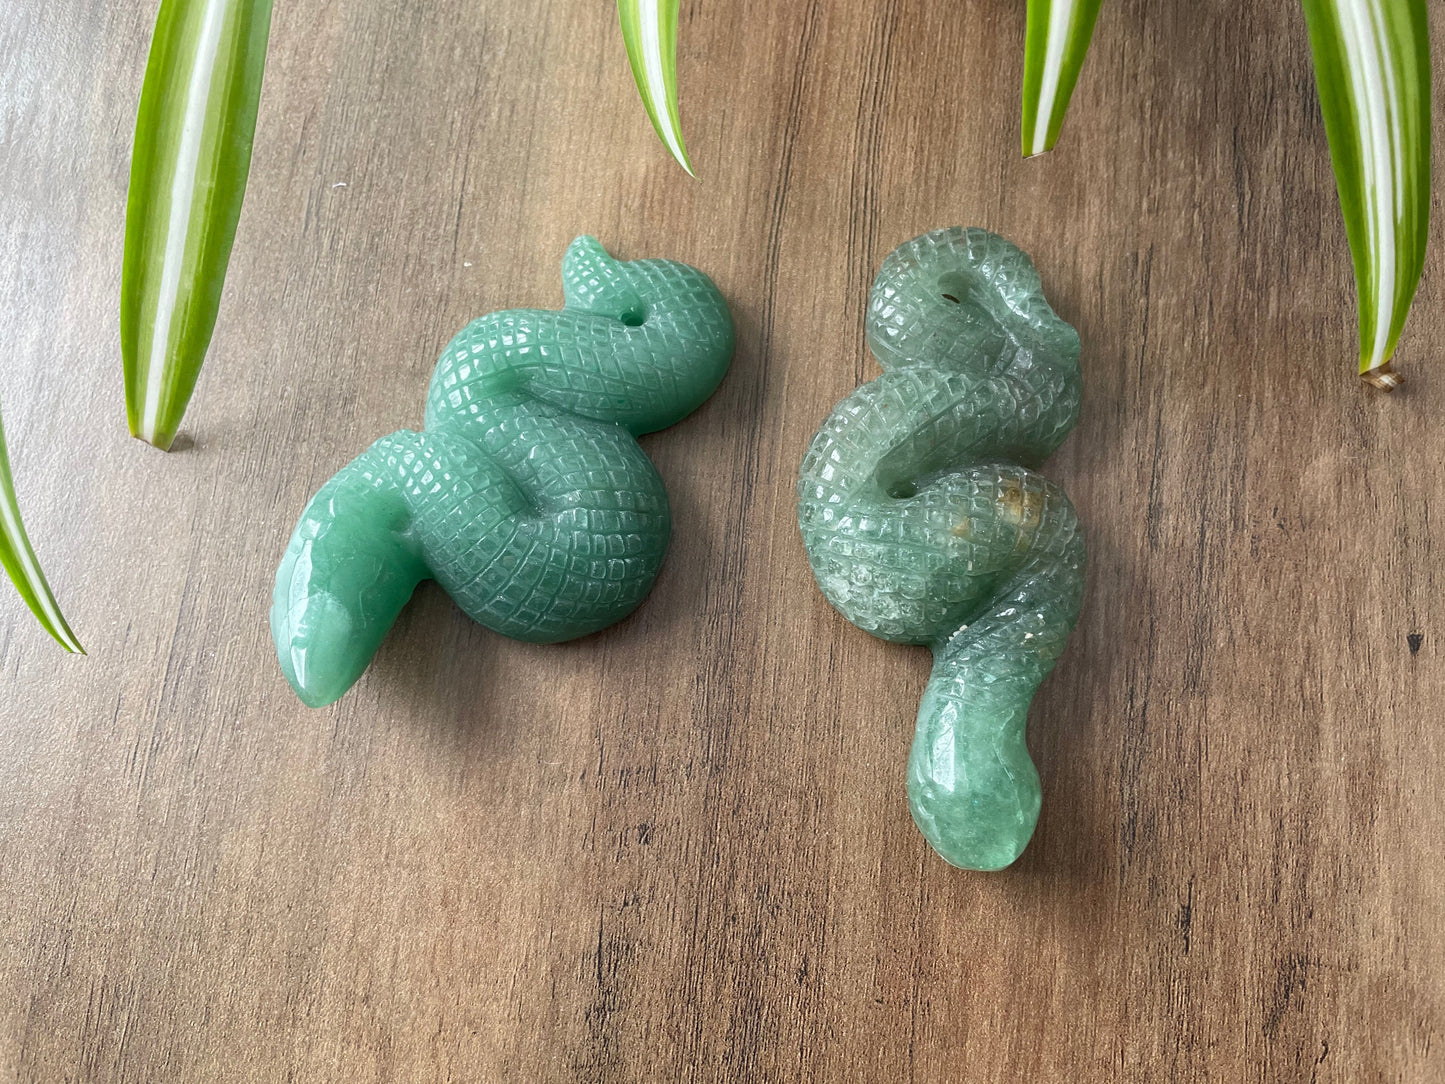 Pictured is a snake or serpent carved out of green aventurine.